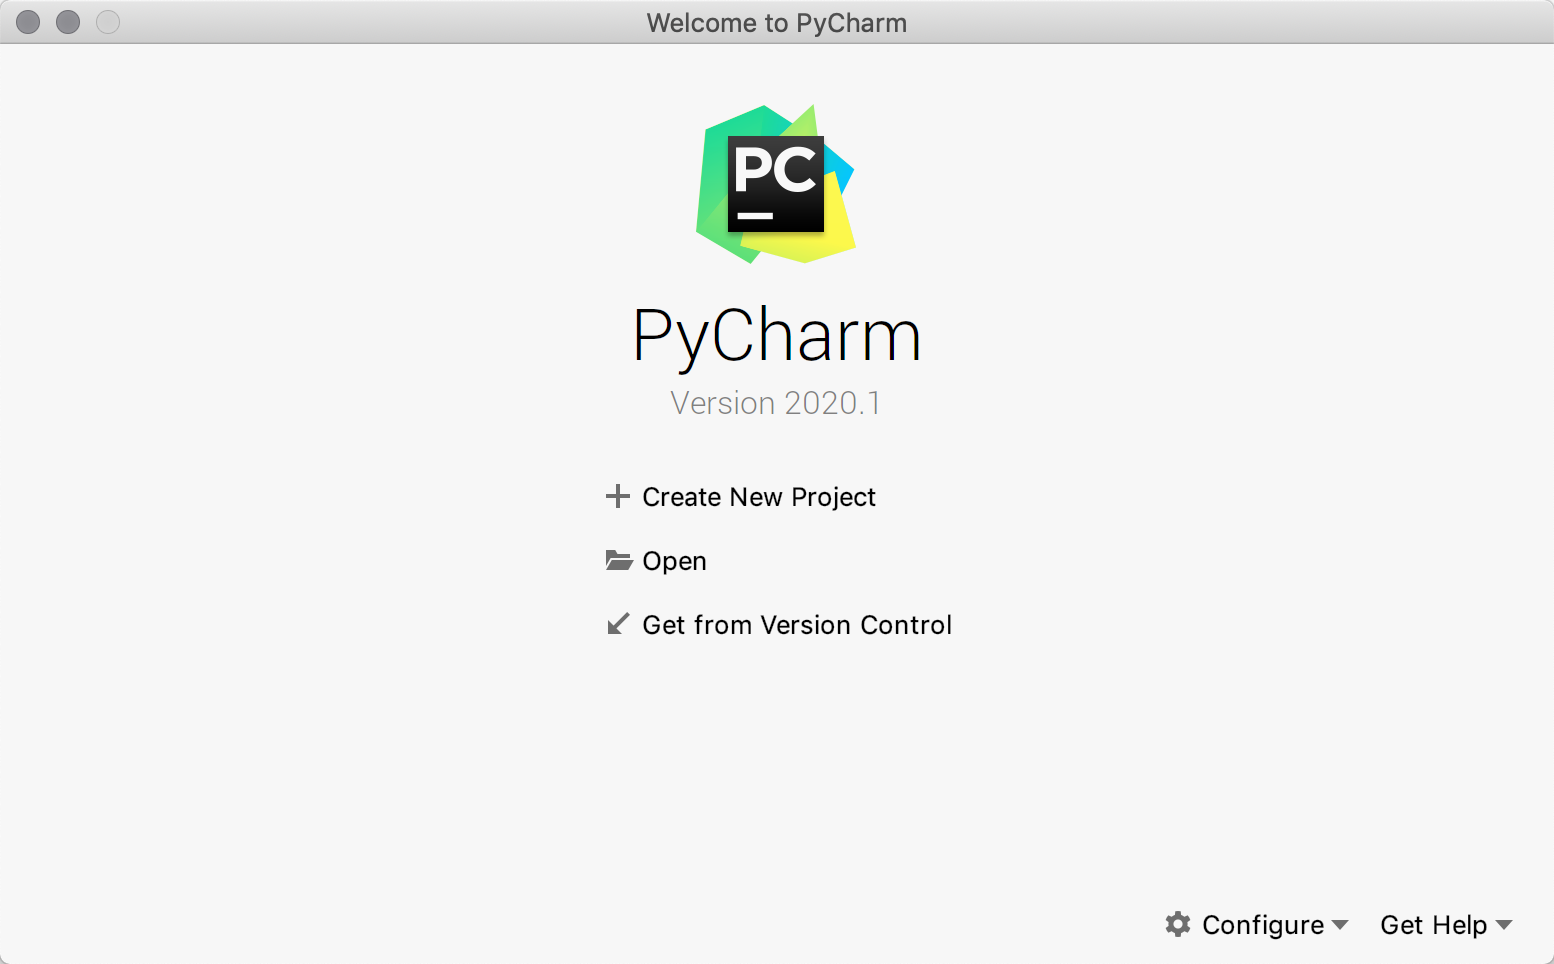 res/pycharm-welcome.png